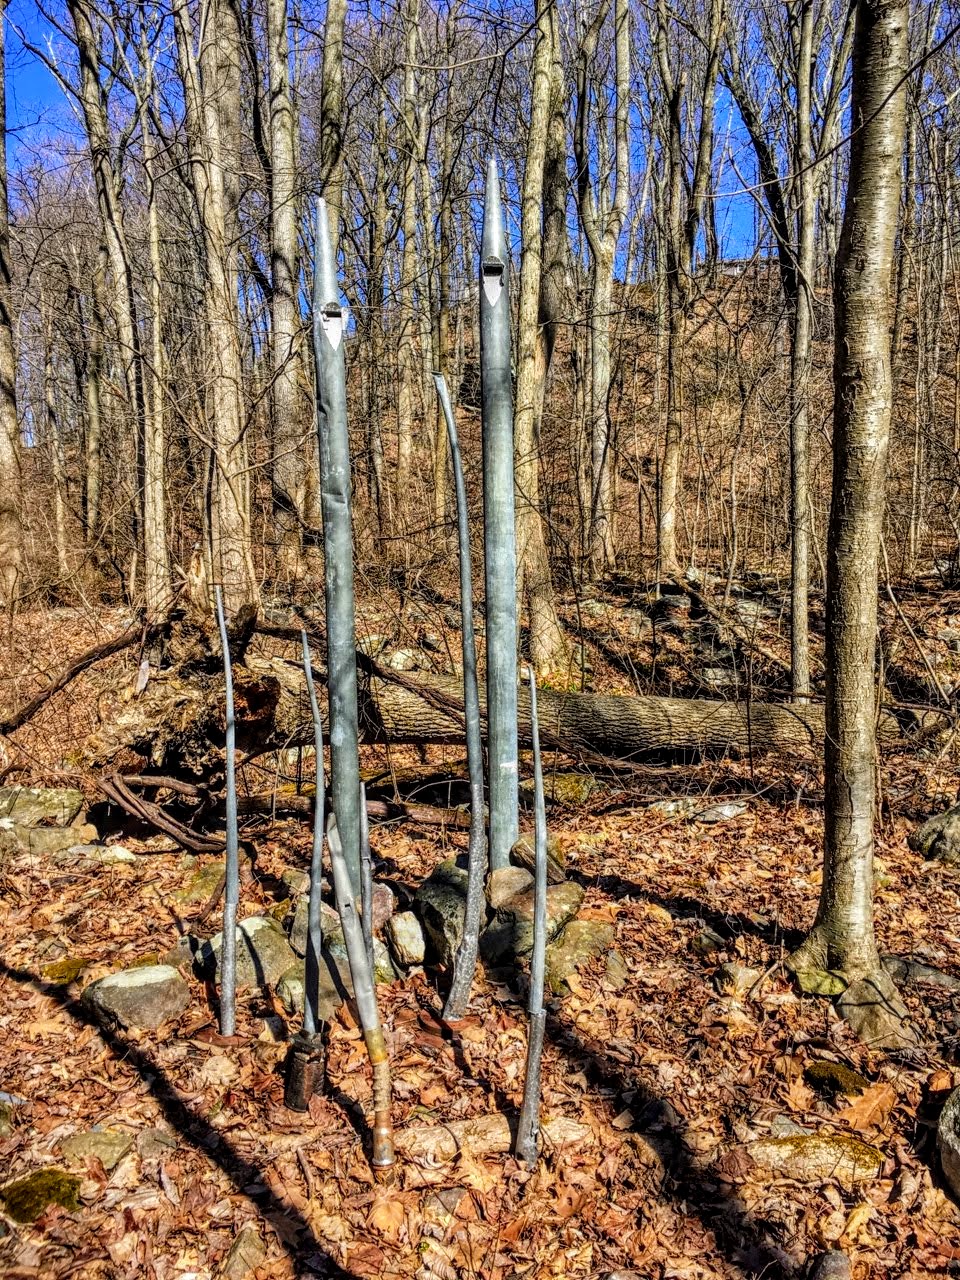 Seven organ pipes, ranging from 2 feet to 6 feet in height, emerge from the leaf litter in a winter forest.